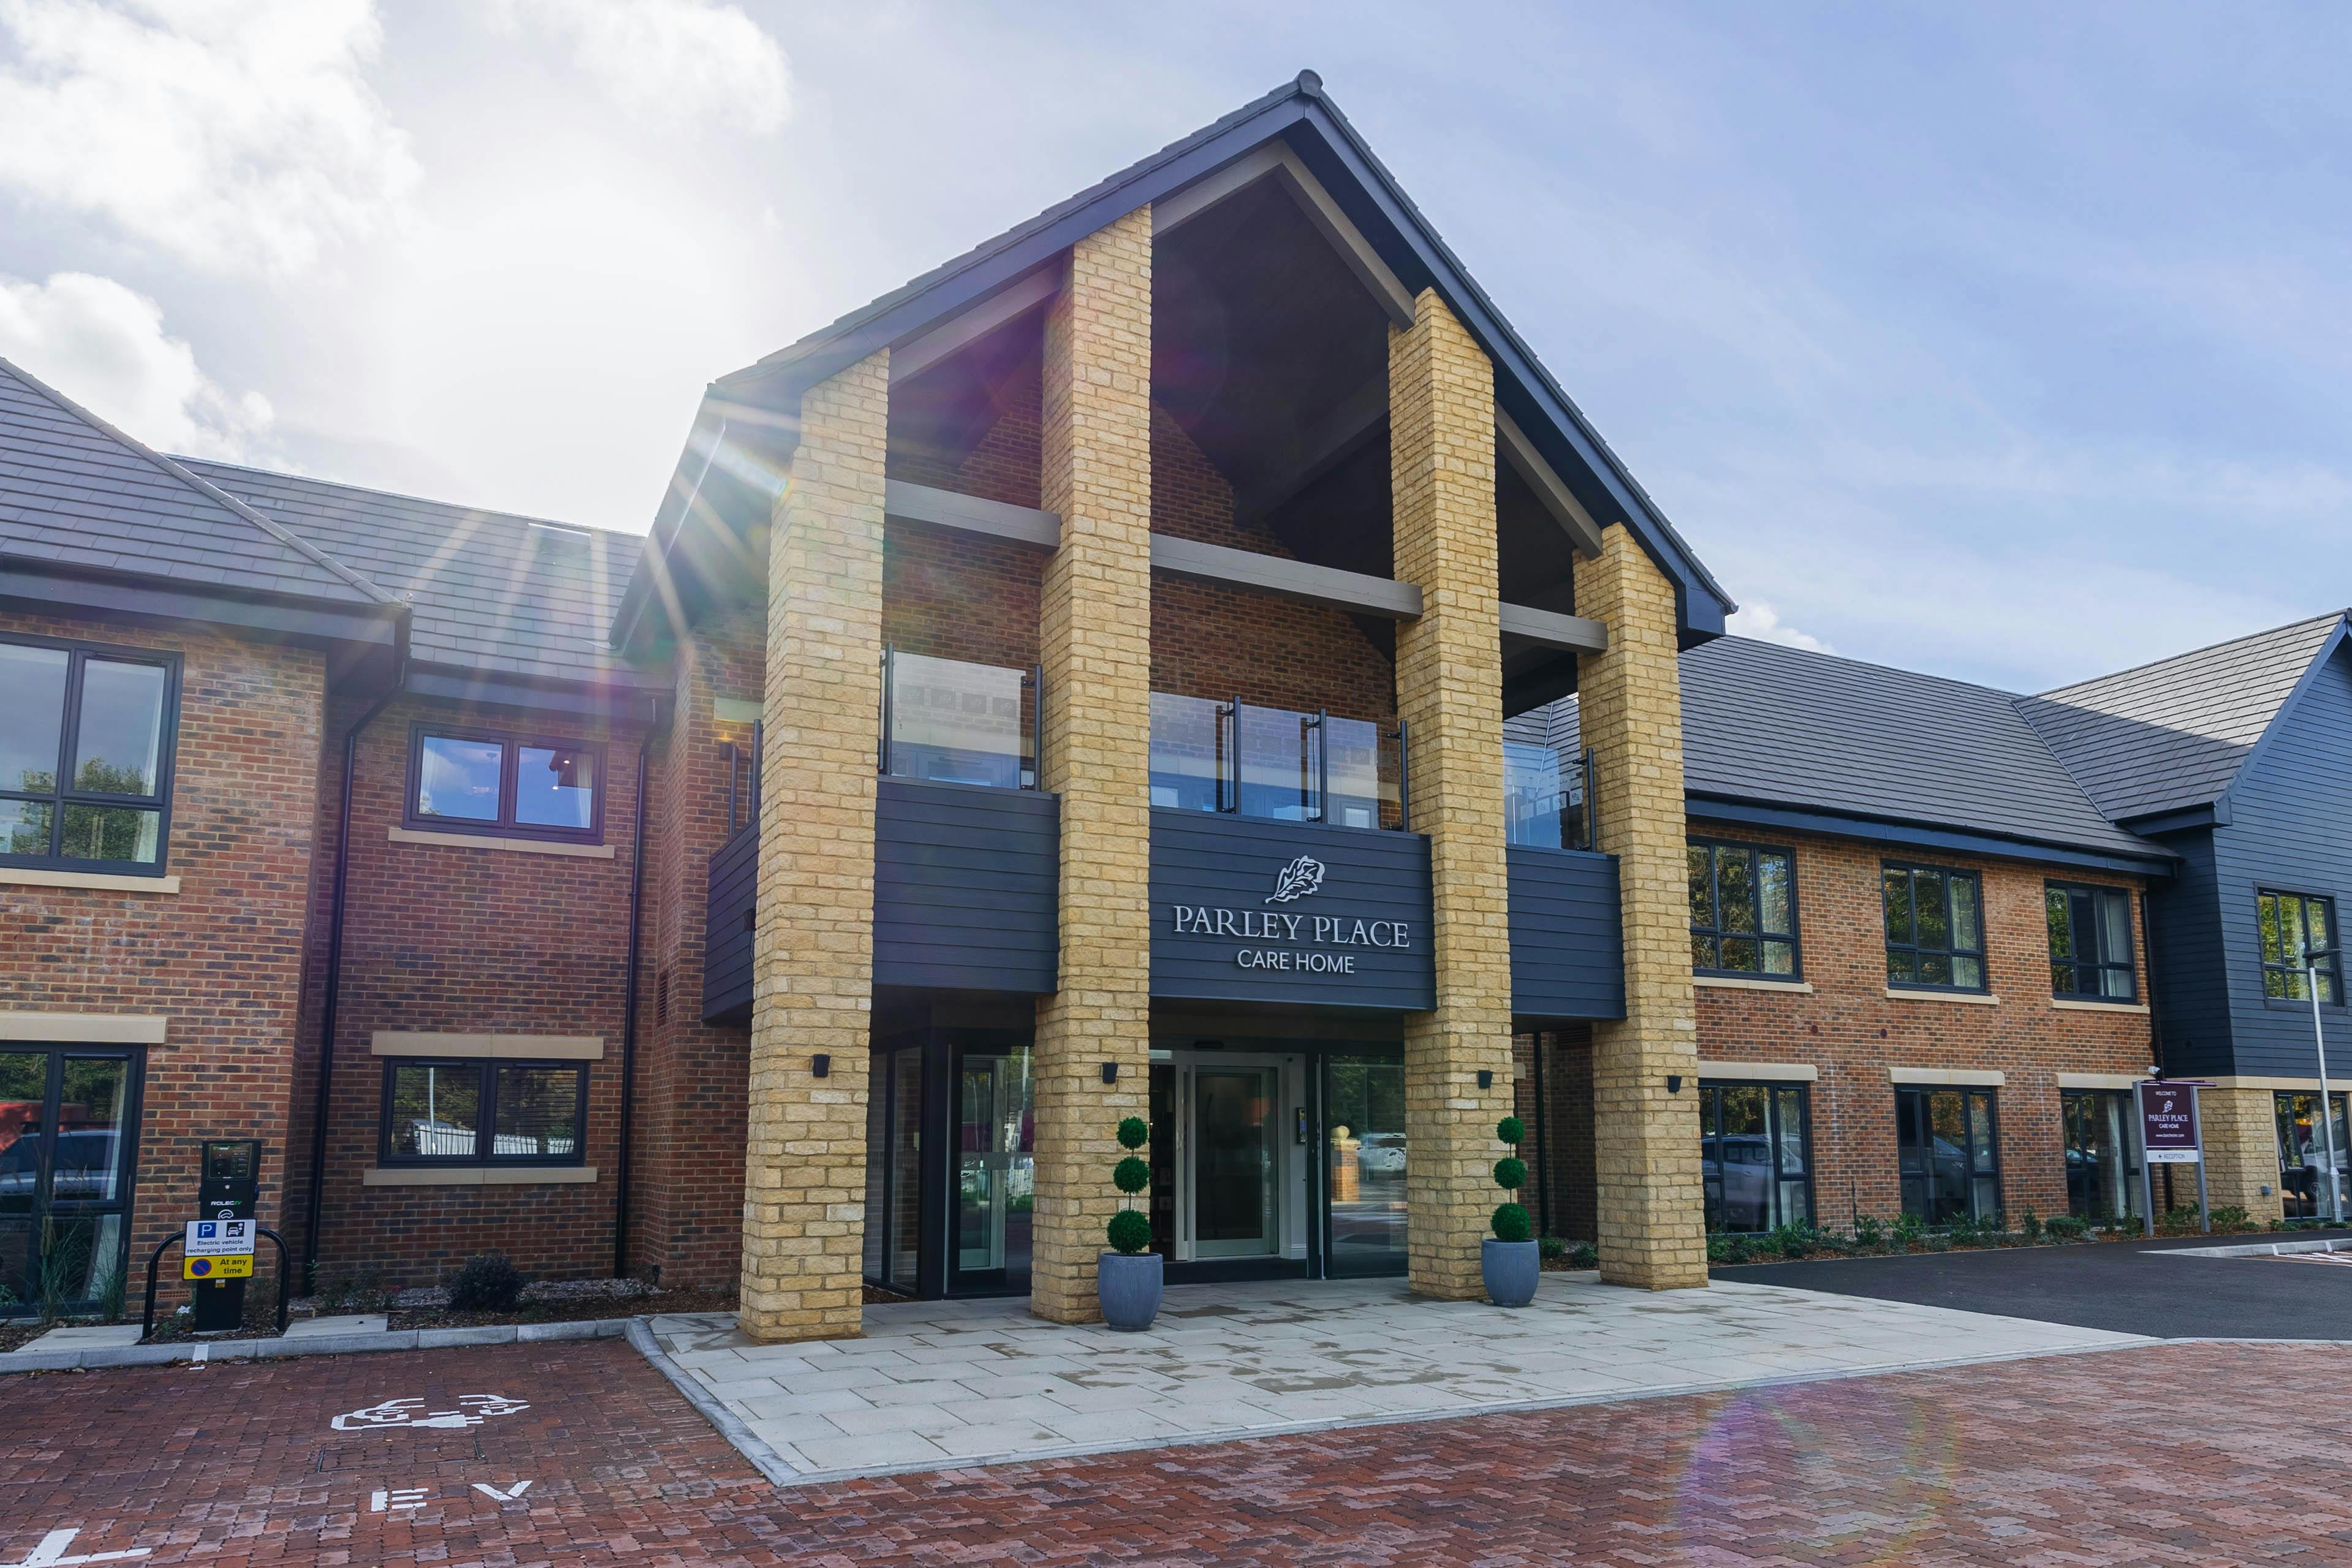 Exterior of Parley Place Care Home in Ferndown, Dorset